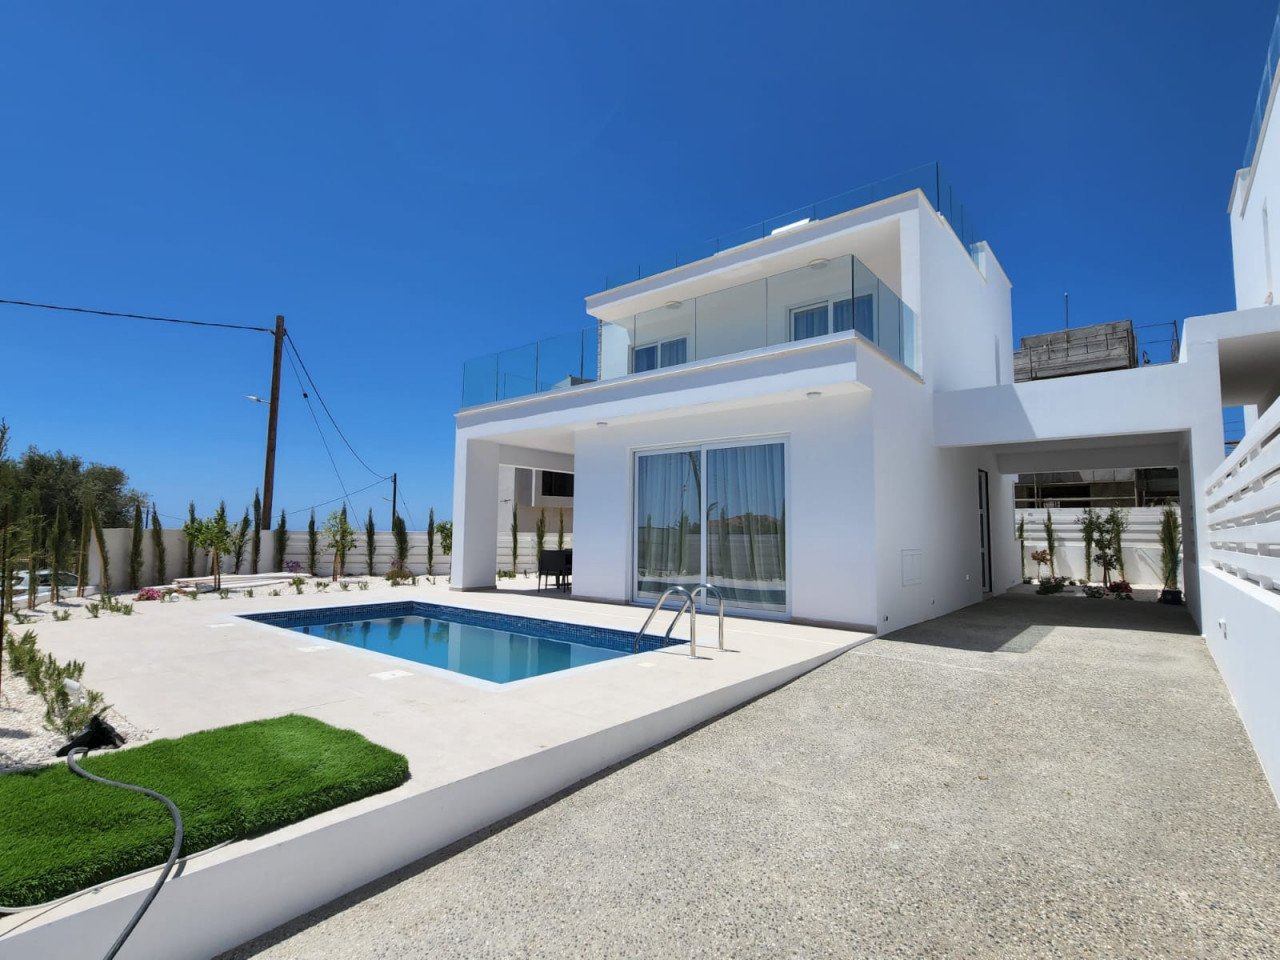 Property for Rent: House (Detached) in Pegeia, Paphos for Rent | Key Realtor Cyprus